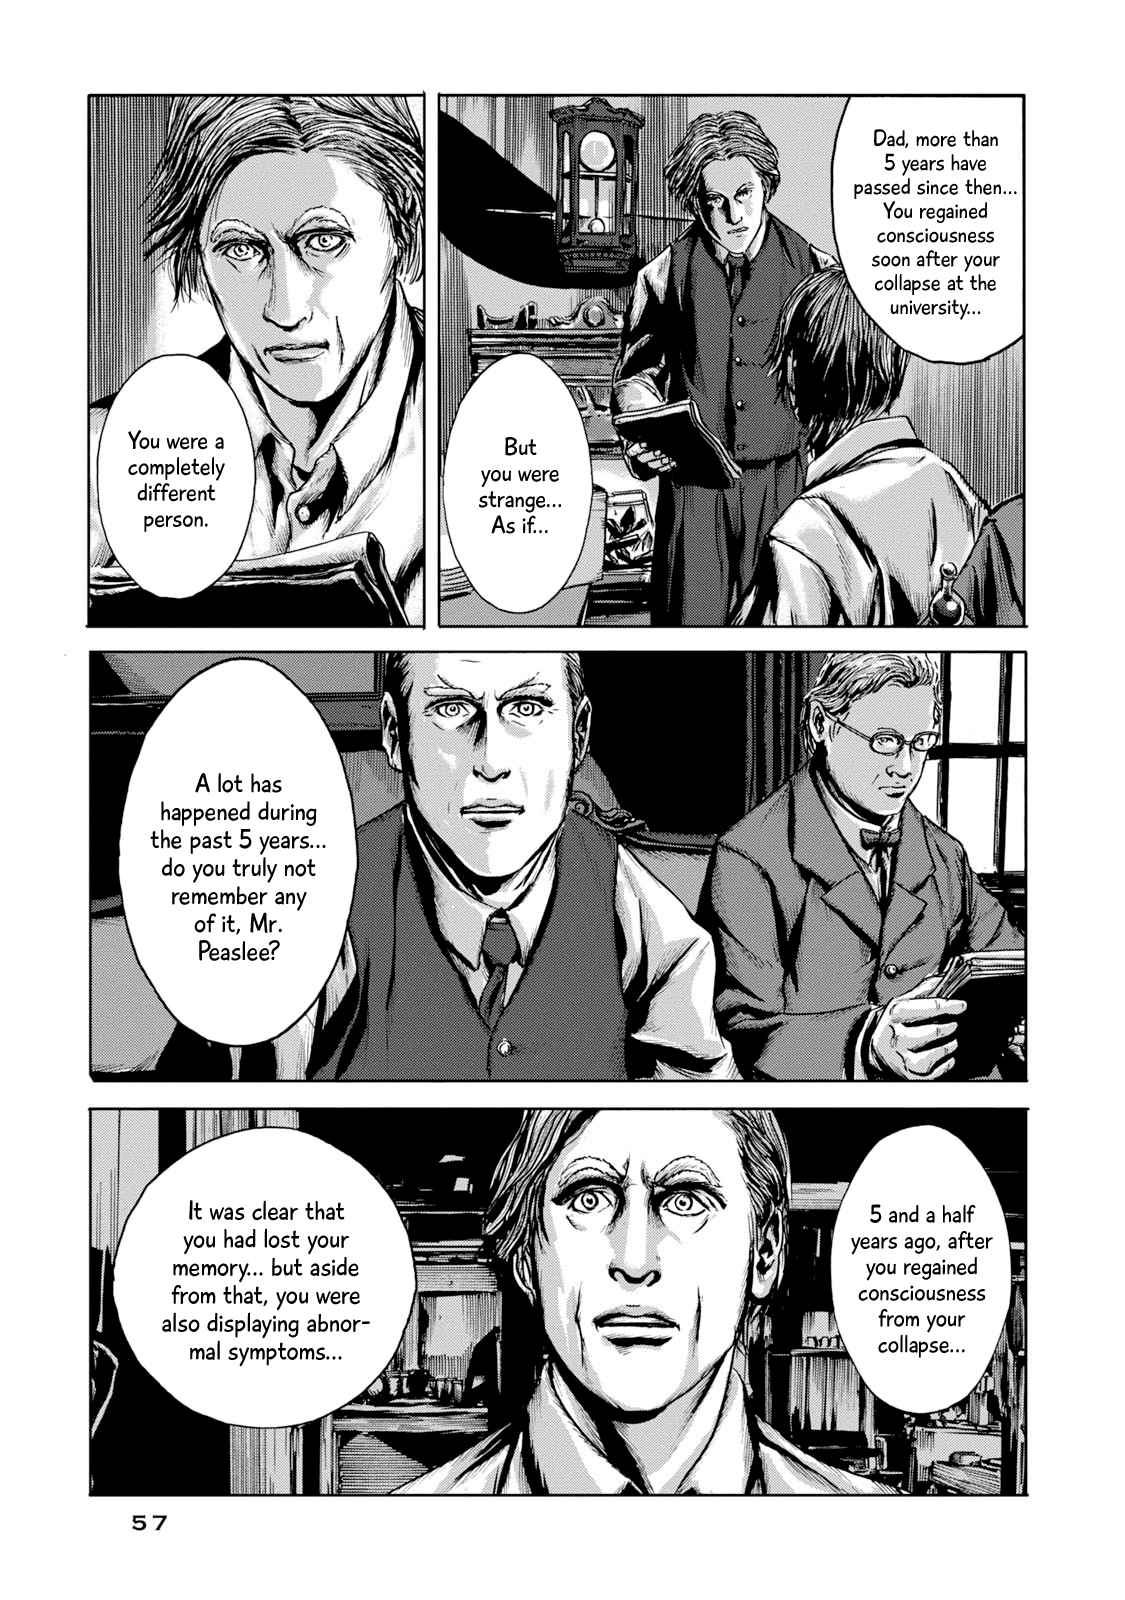 H. P. Lovecraft's The Shadow out of Time Vol. 1 Ch. 1 The Queer Amnesia